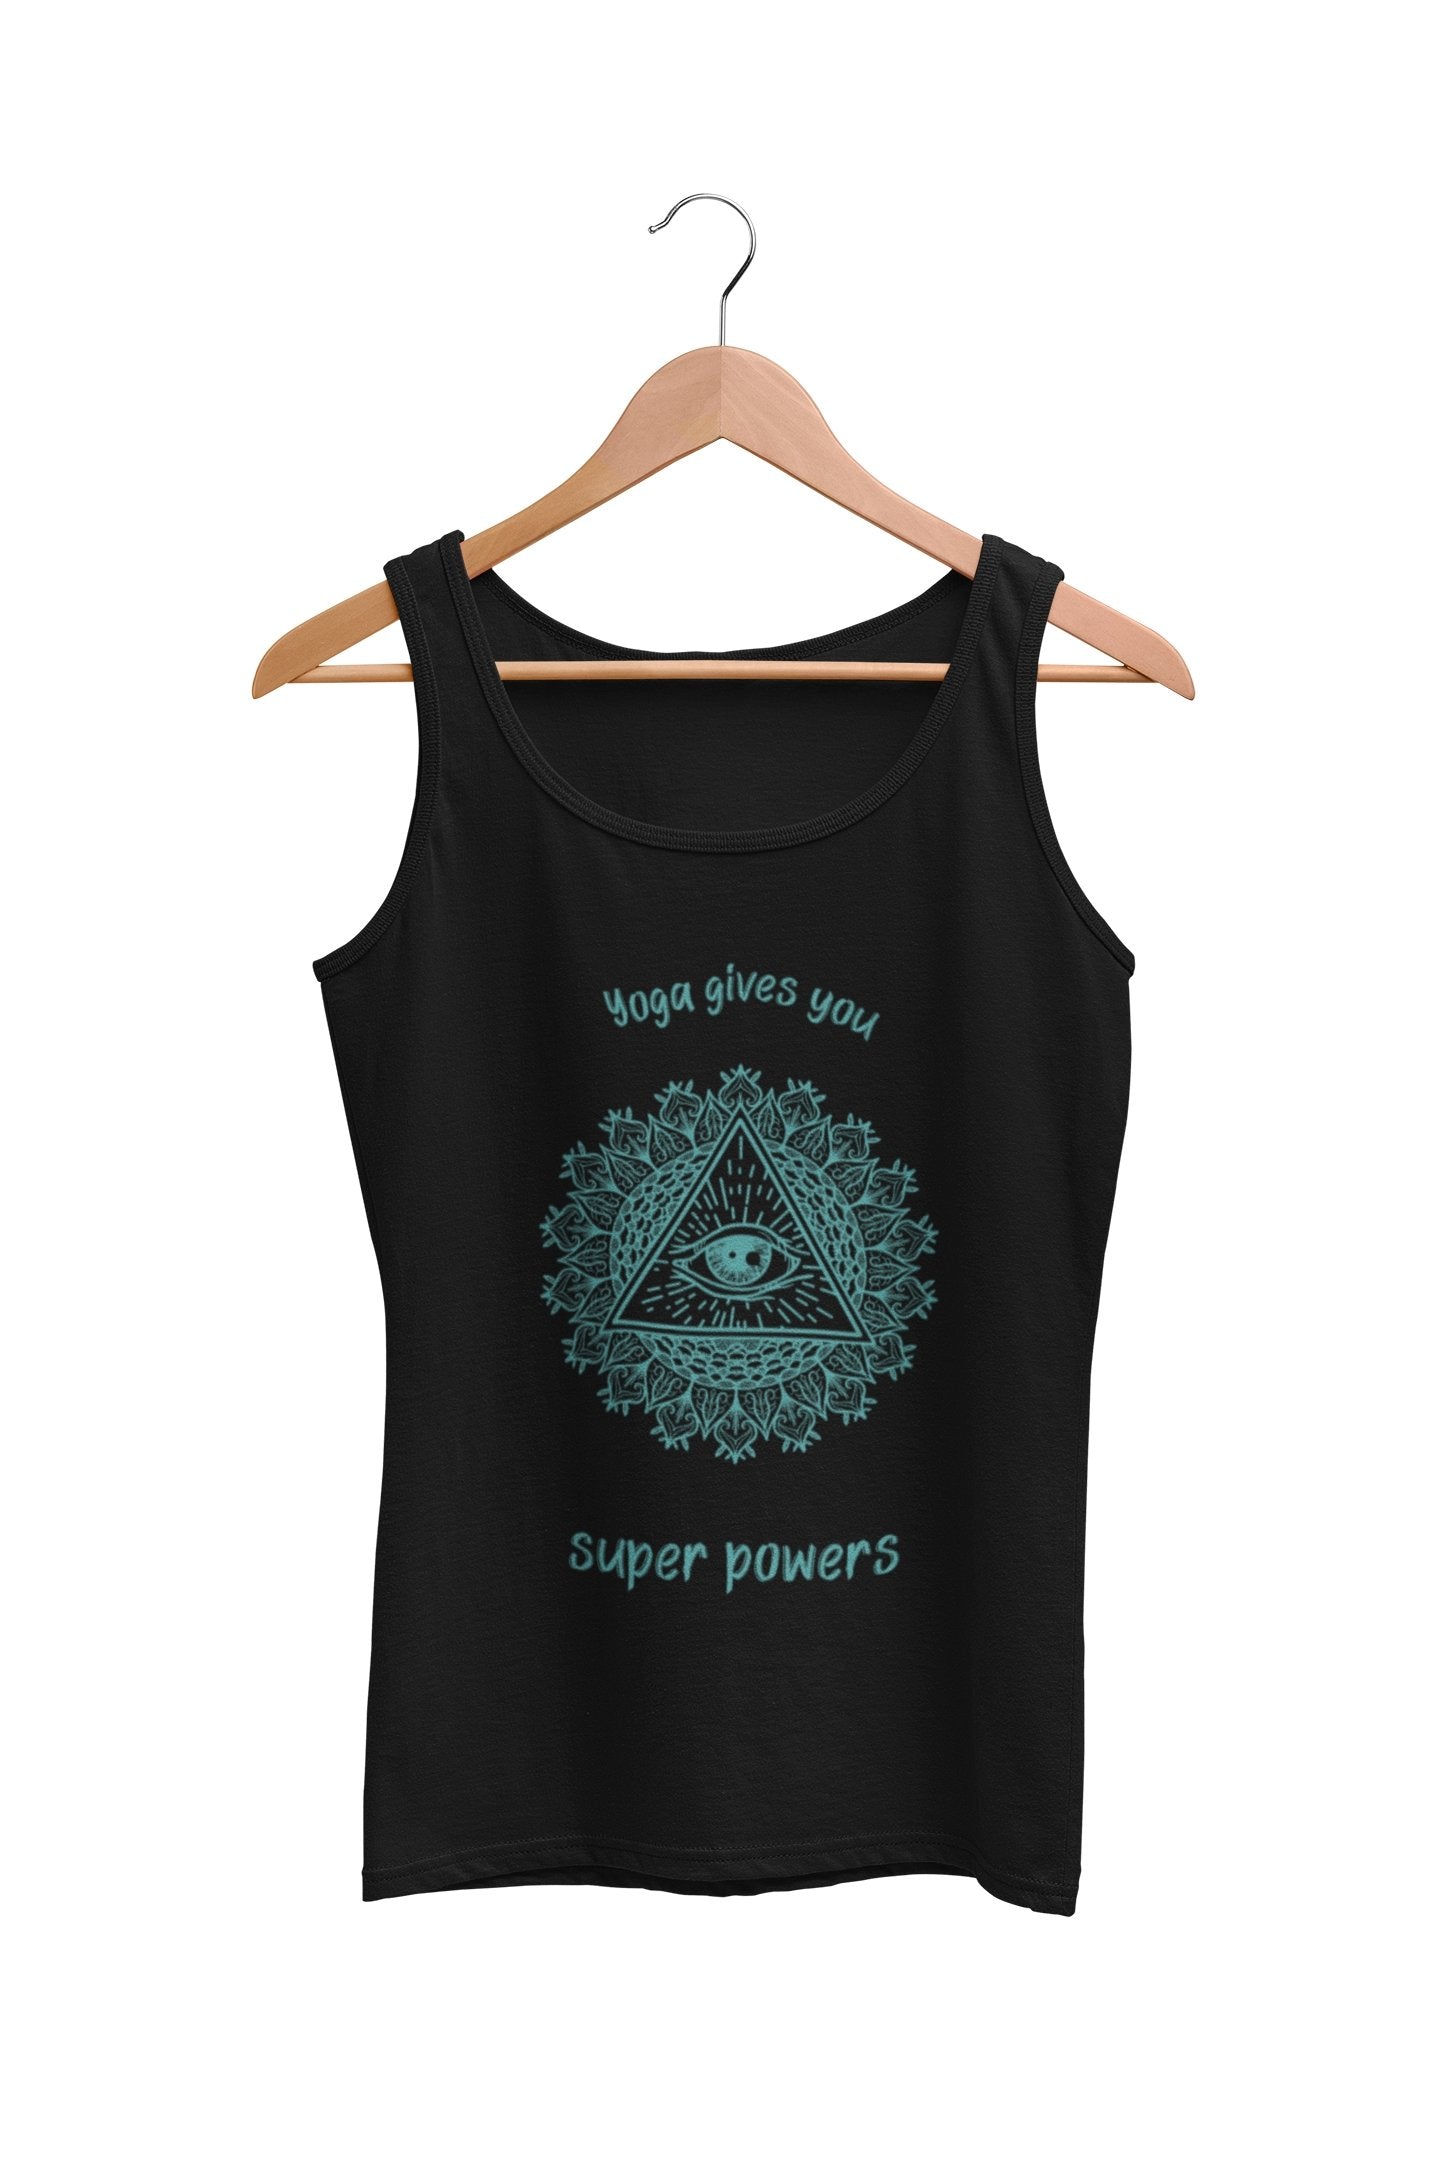 thelegalgang,Yoga Give You Super Powers Graphic Tank Top,TANK TOP.